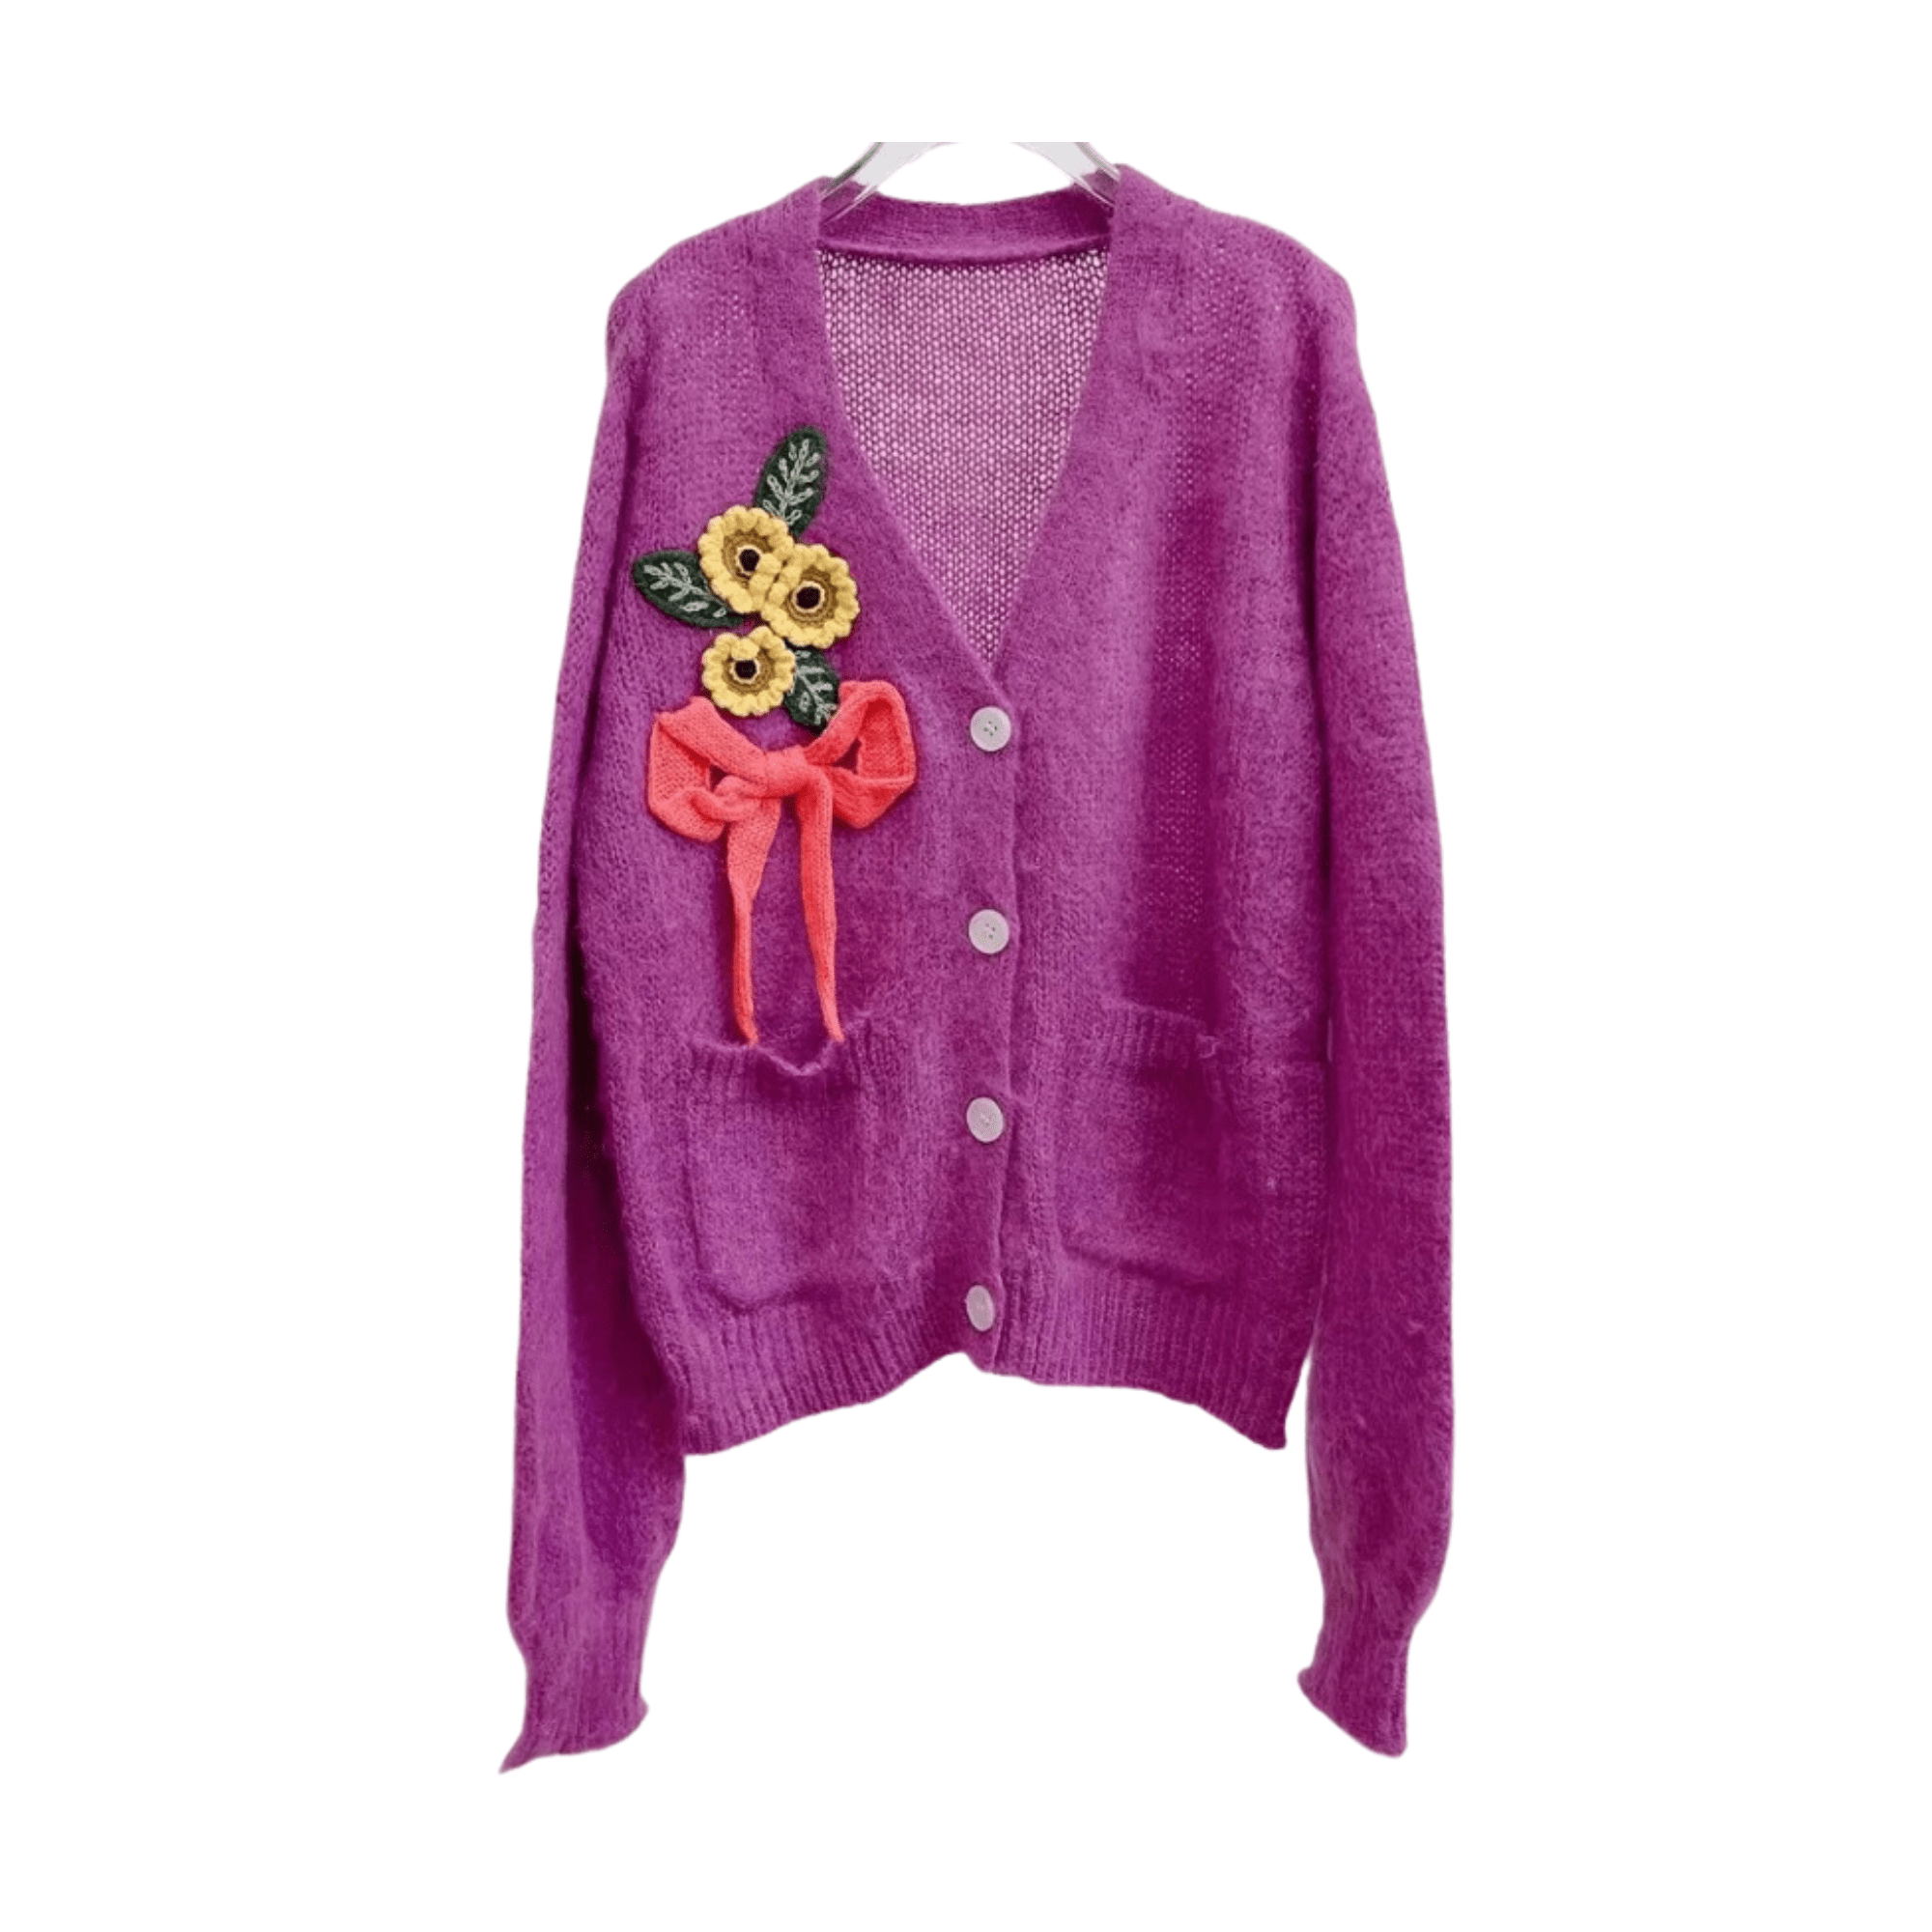 Floral Attached Corsage Knit Thin Sweater - Kelly Obi New York